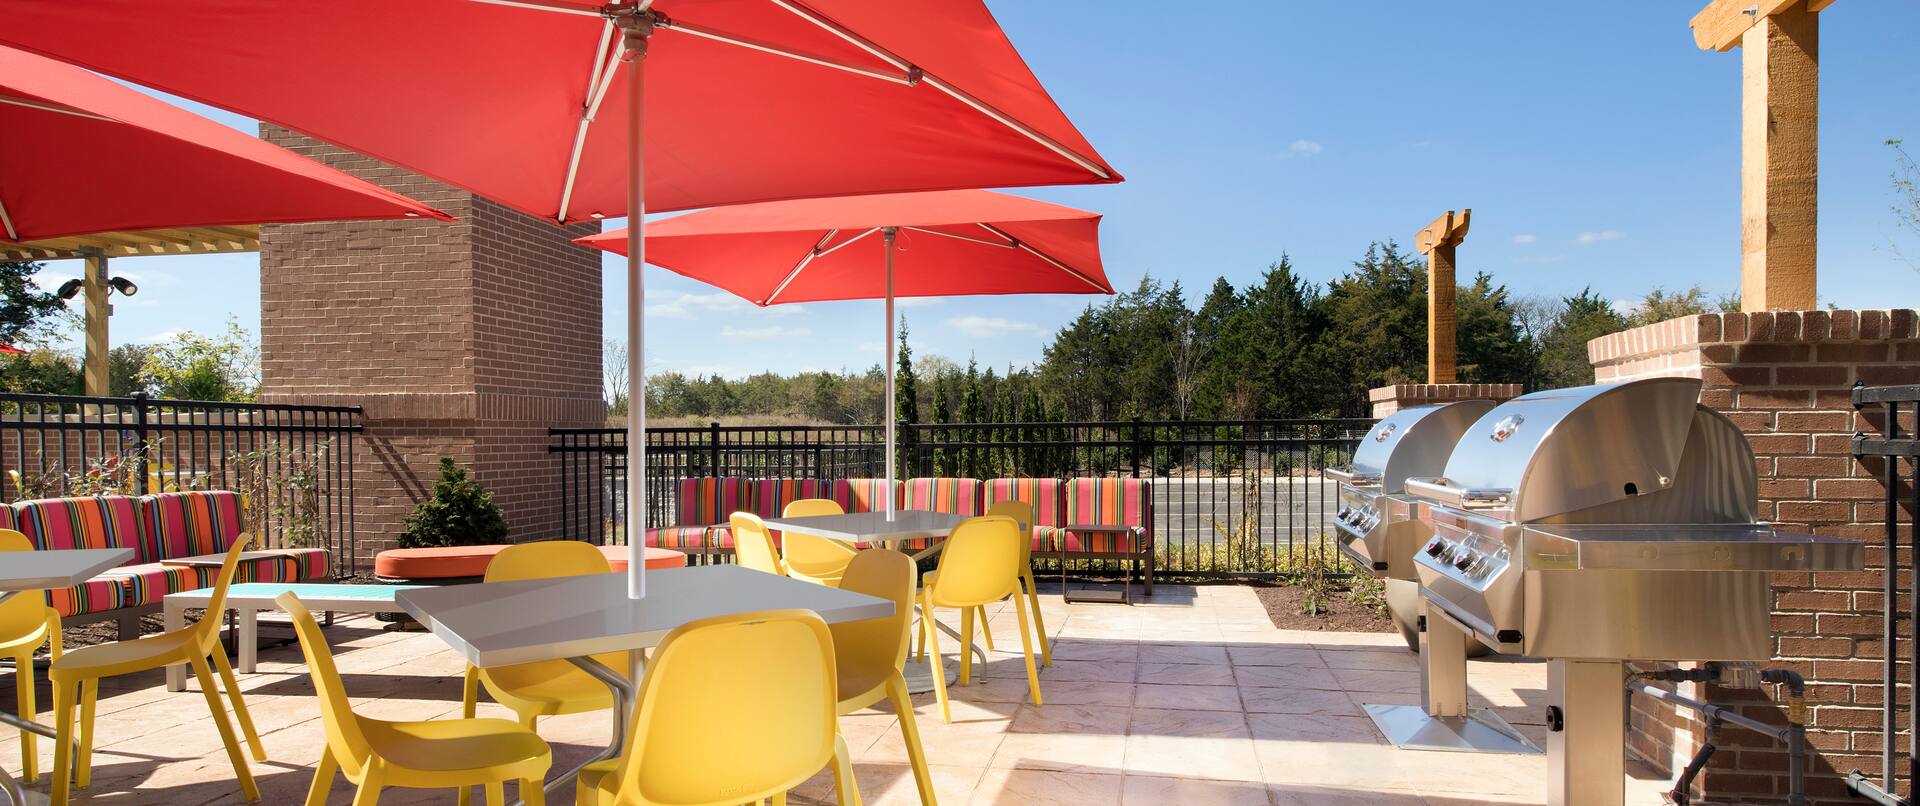 Outdoor patio with grills and seating area with tables, chairs and parasols